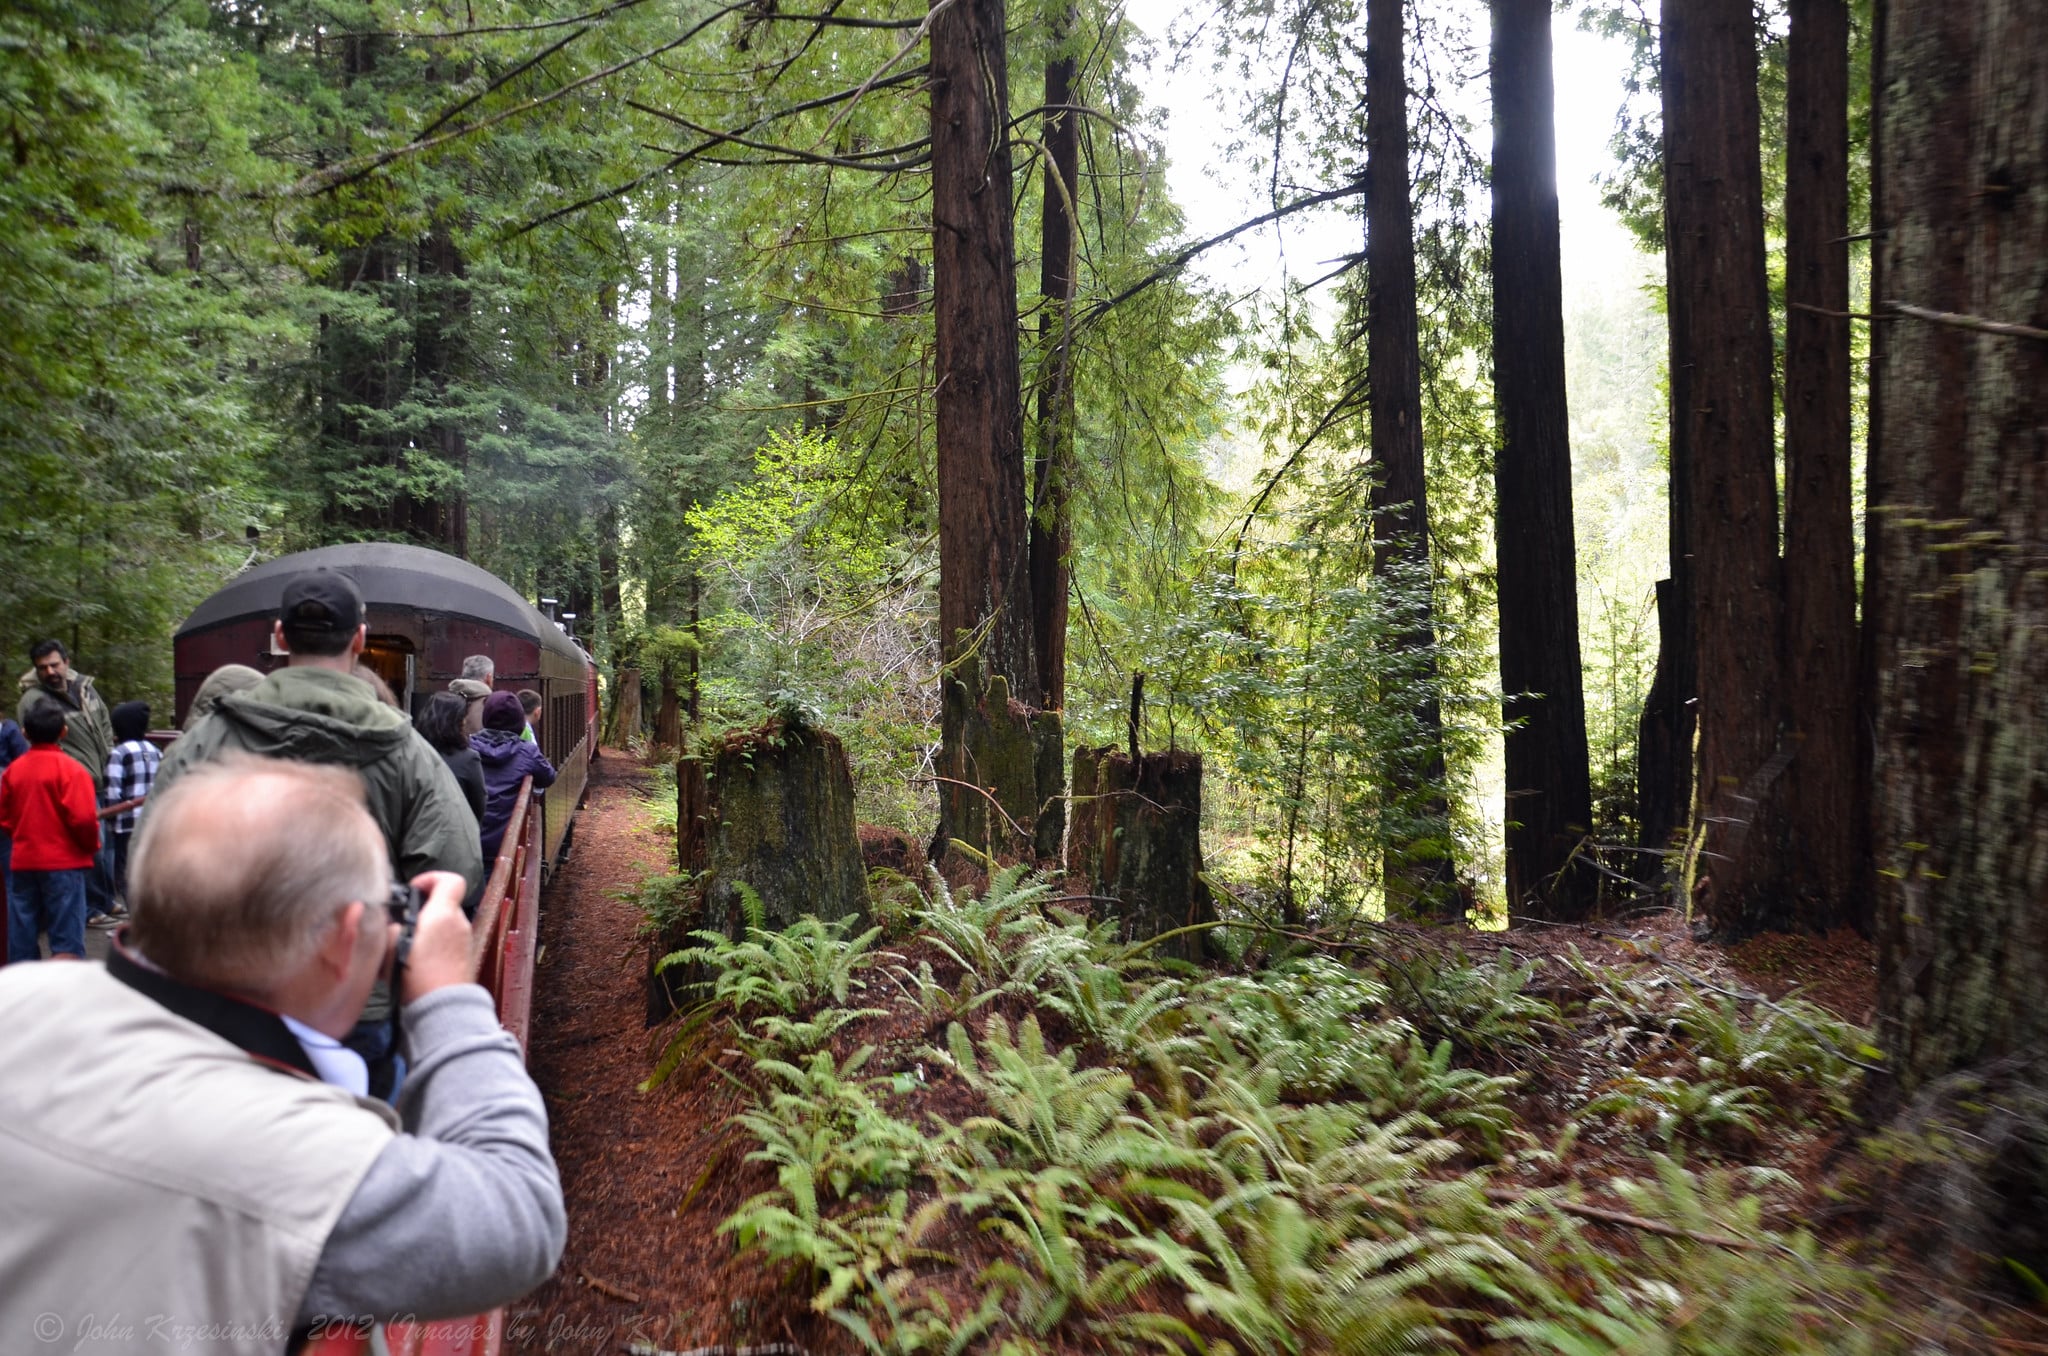 Passengers aboard the Skunk Train stand on an open-air observation car and take photographs of passing redwood trees and ferns.